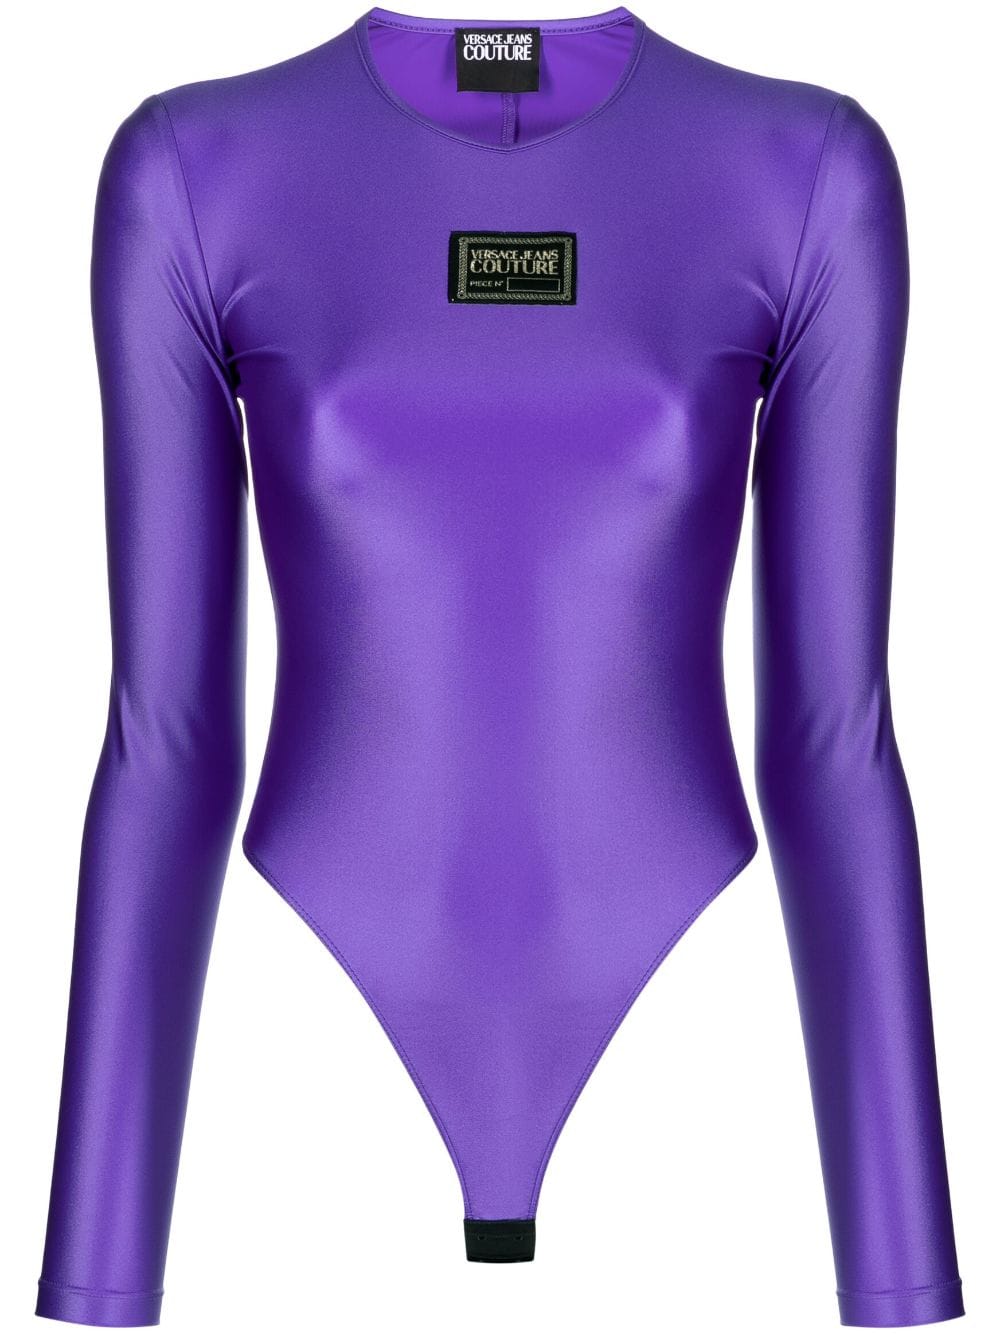 Versace Jeans Couture Body mit Logo-Patch - Violett von Versace Jeans Couture